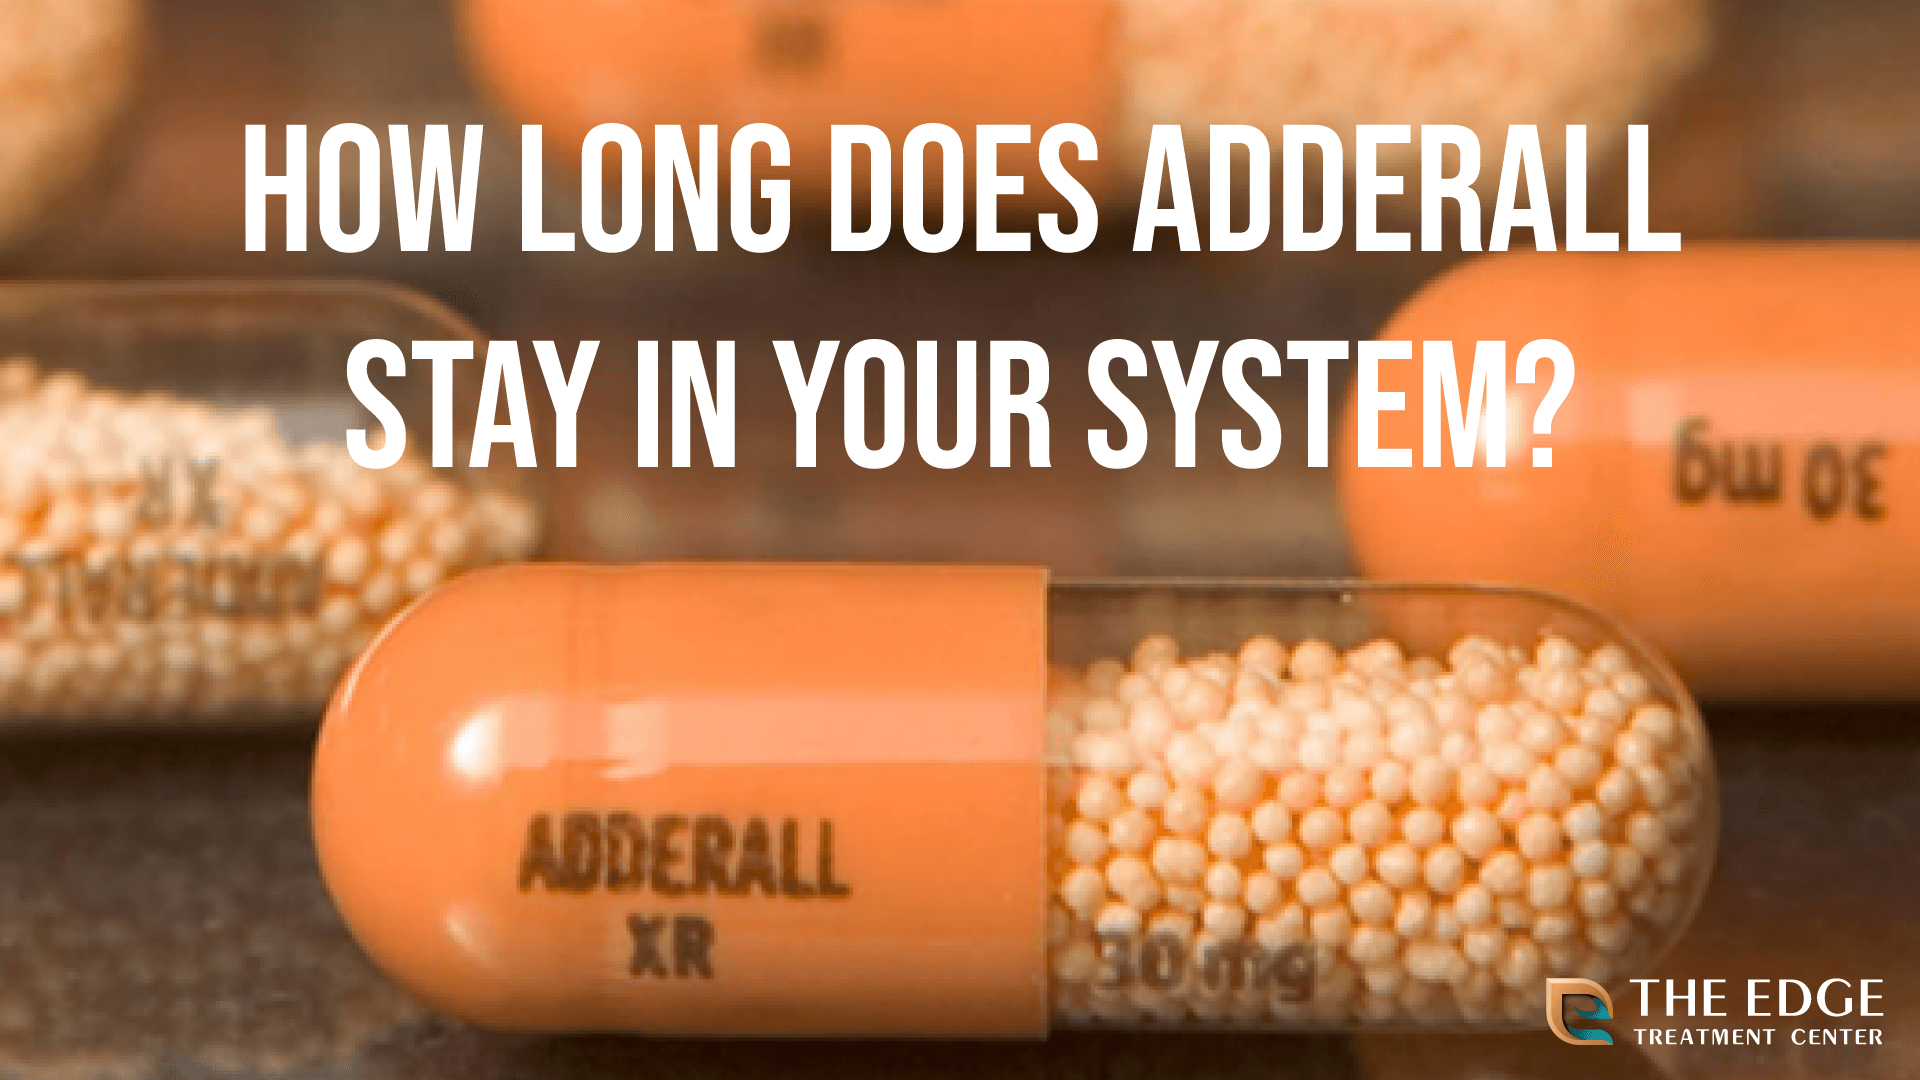 Modafinil Vs Adderall: Which Is More Effective For Adhd?